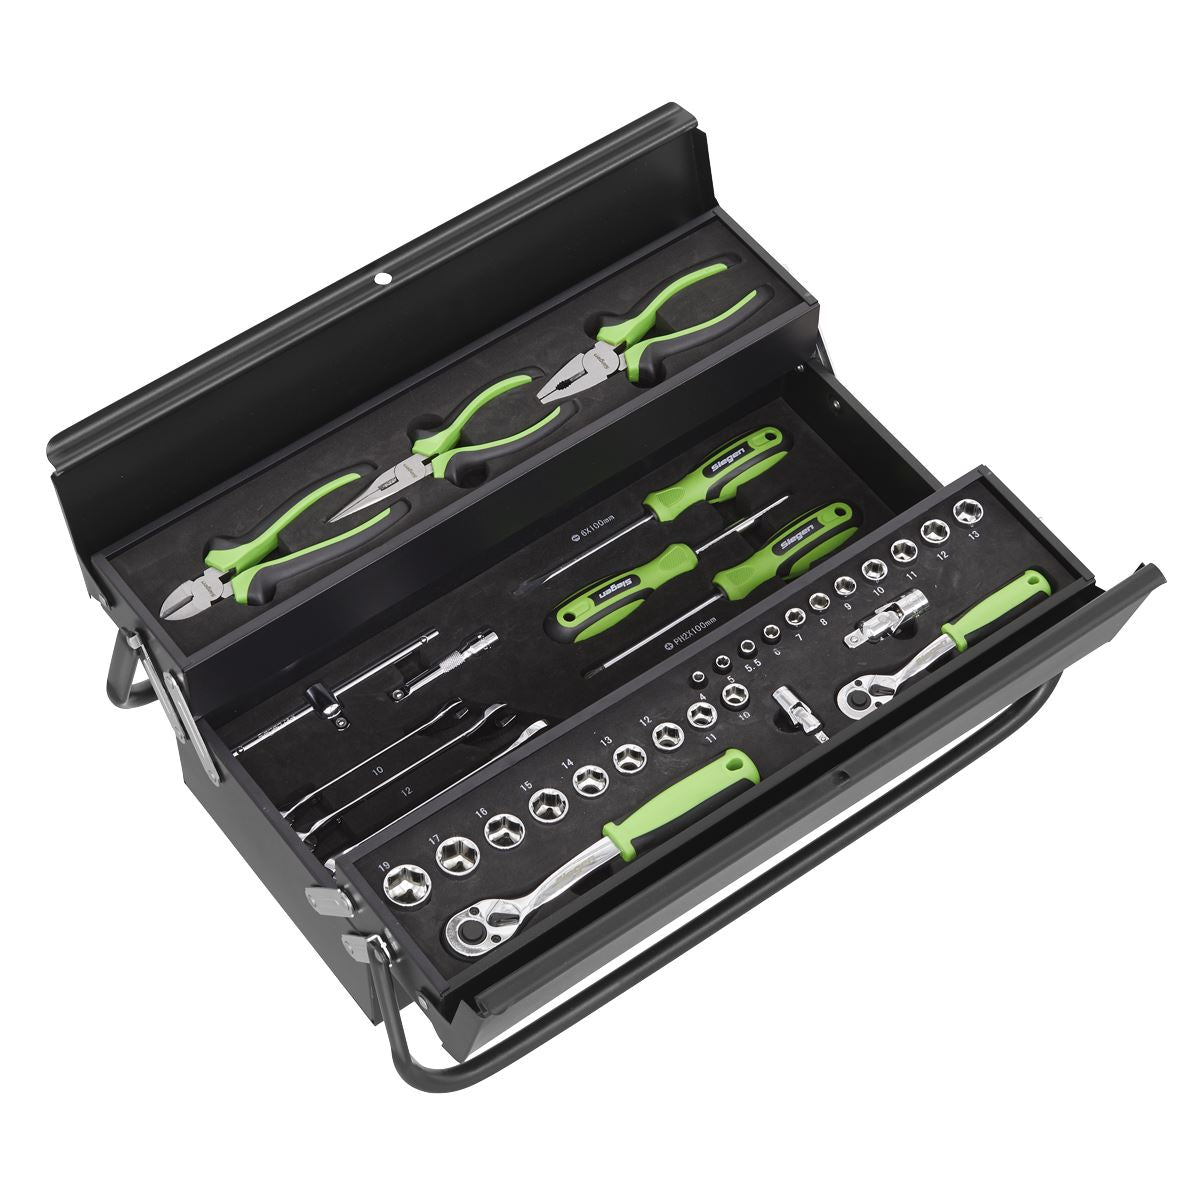 Siegen by Sealey Cantilever Toolbox with Tool Kit 70 Piece Sockets Spanners Screwdrivers